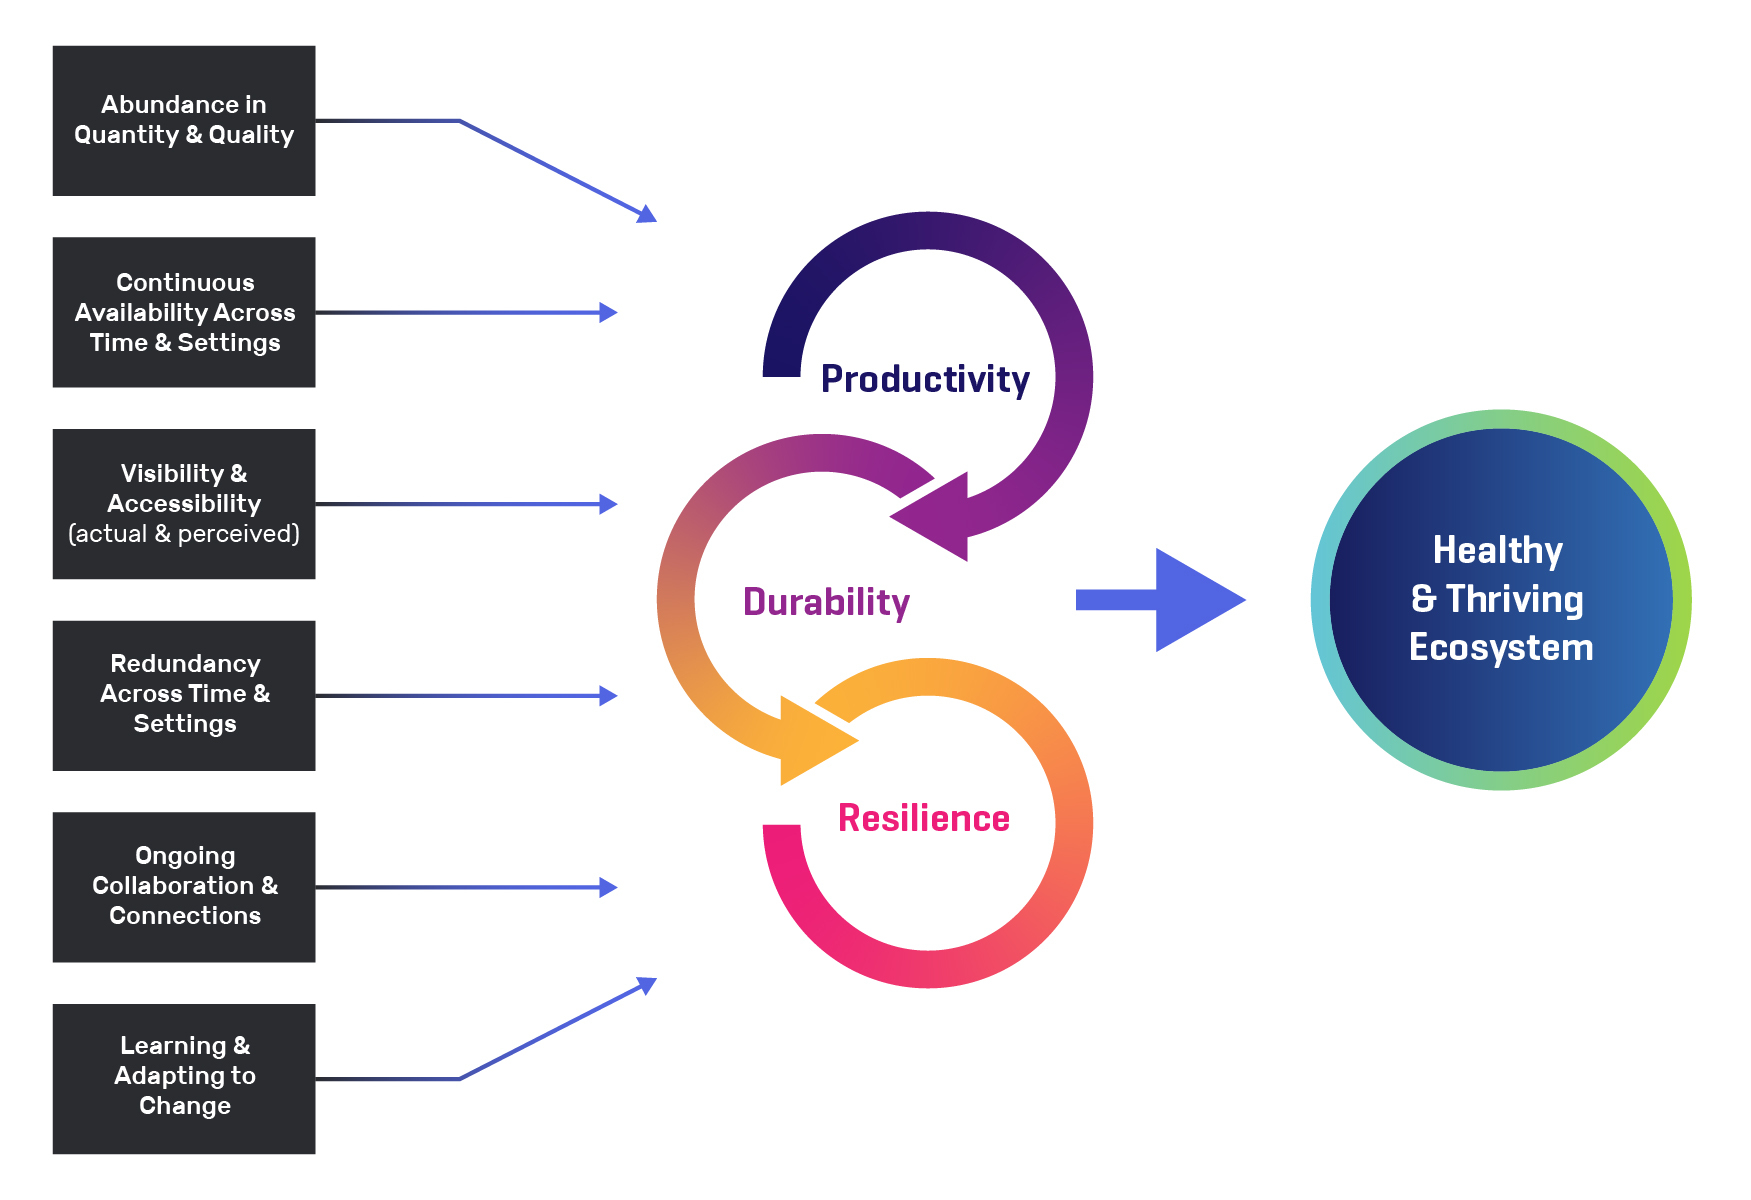 Figure 1. Characteristics and processes of learning resources that affect ecosystem productivity, durability, and resilience and collectively contribute to the maintenance of a healthy and thriving ecosystem.